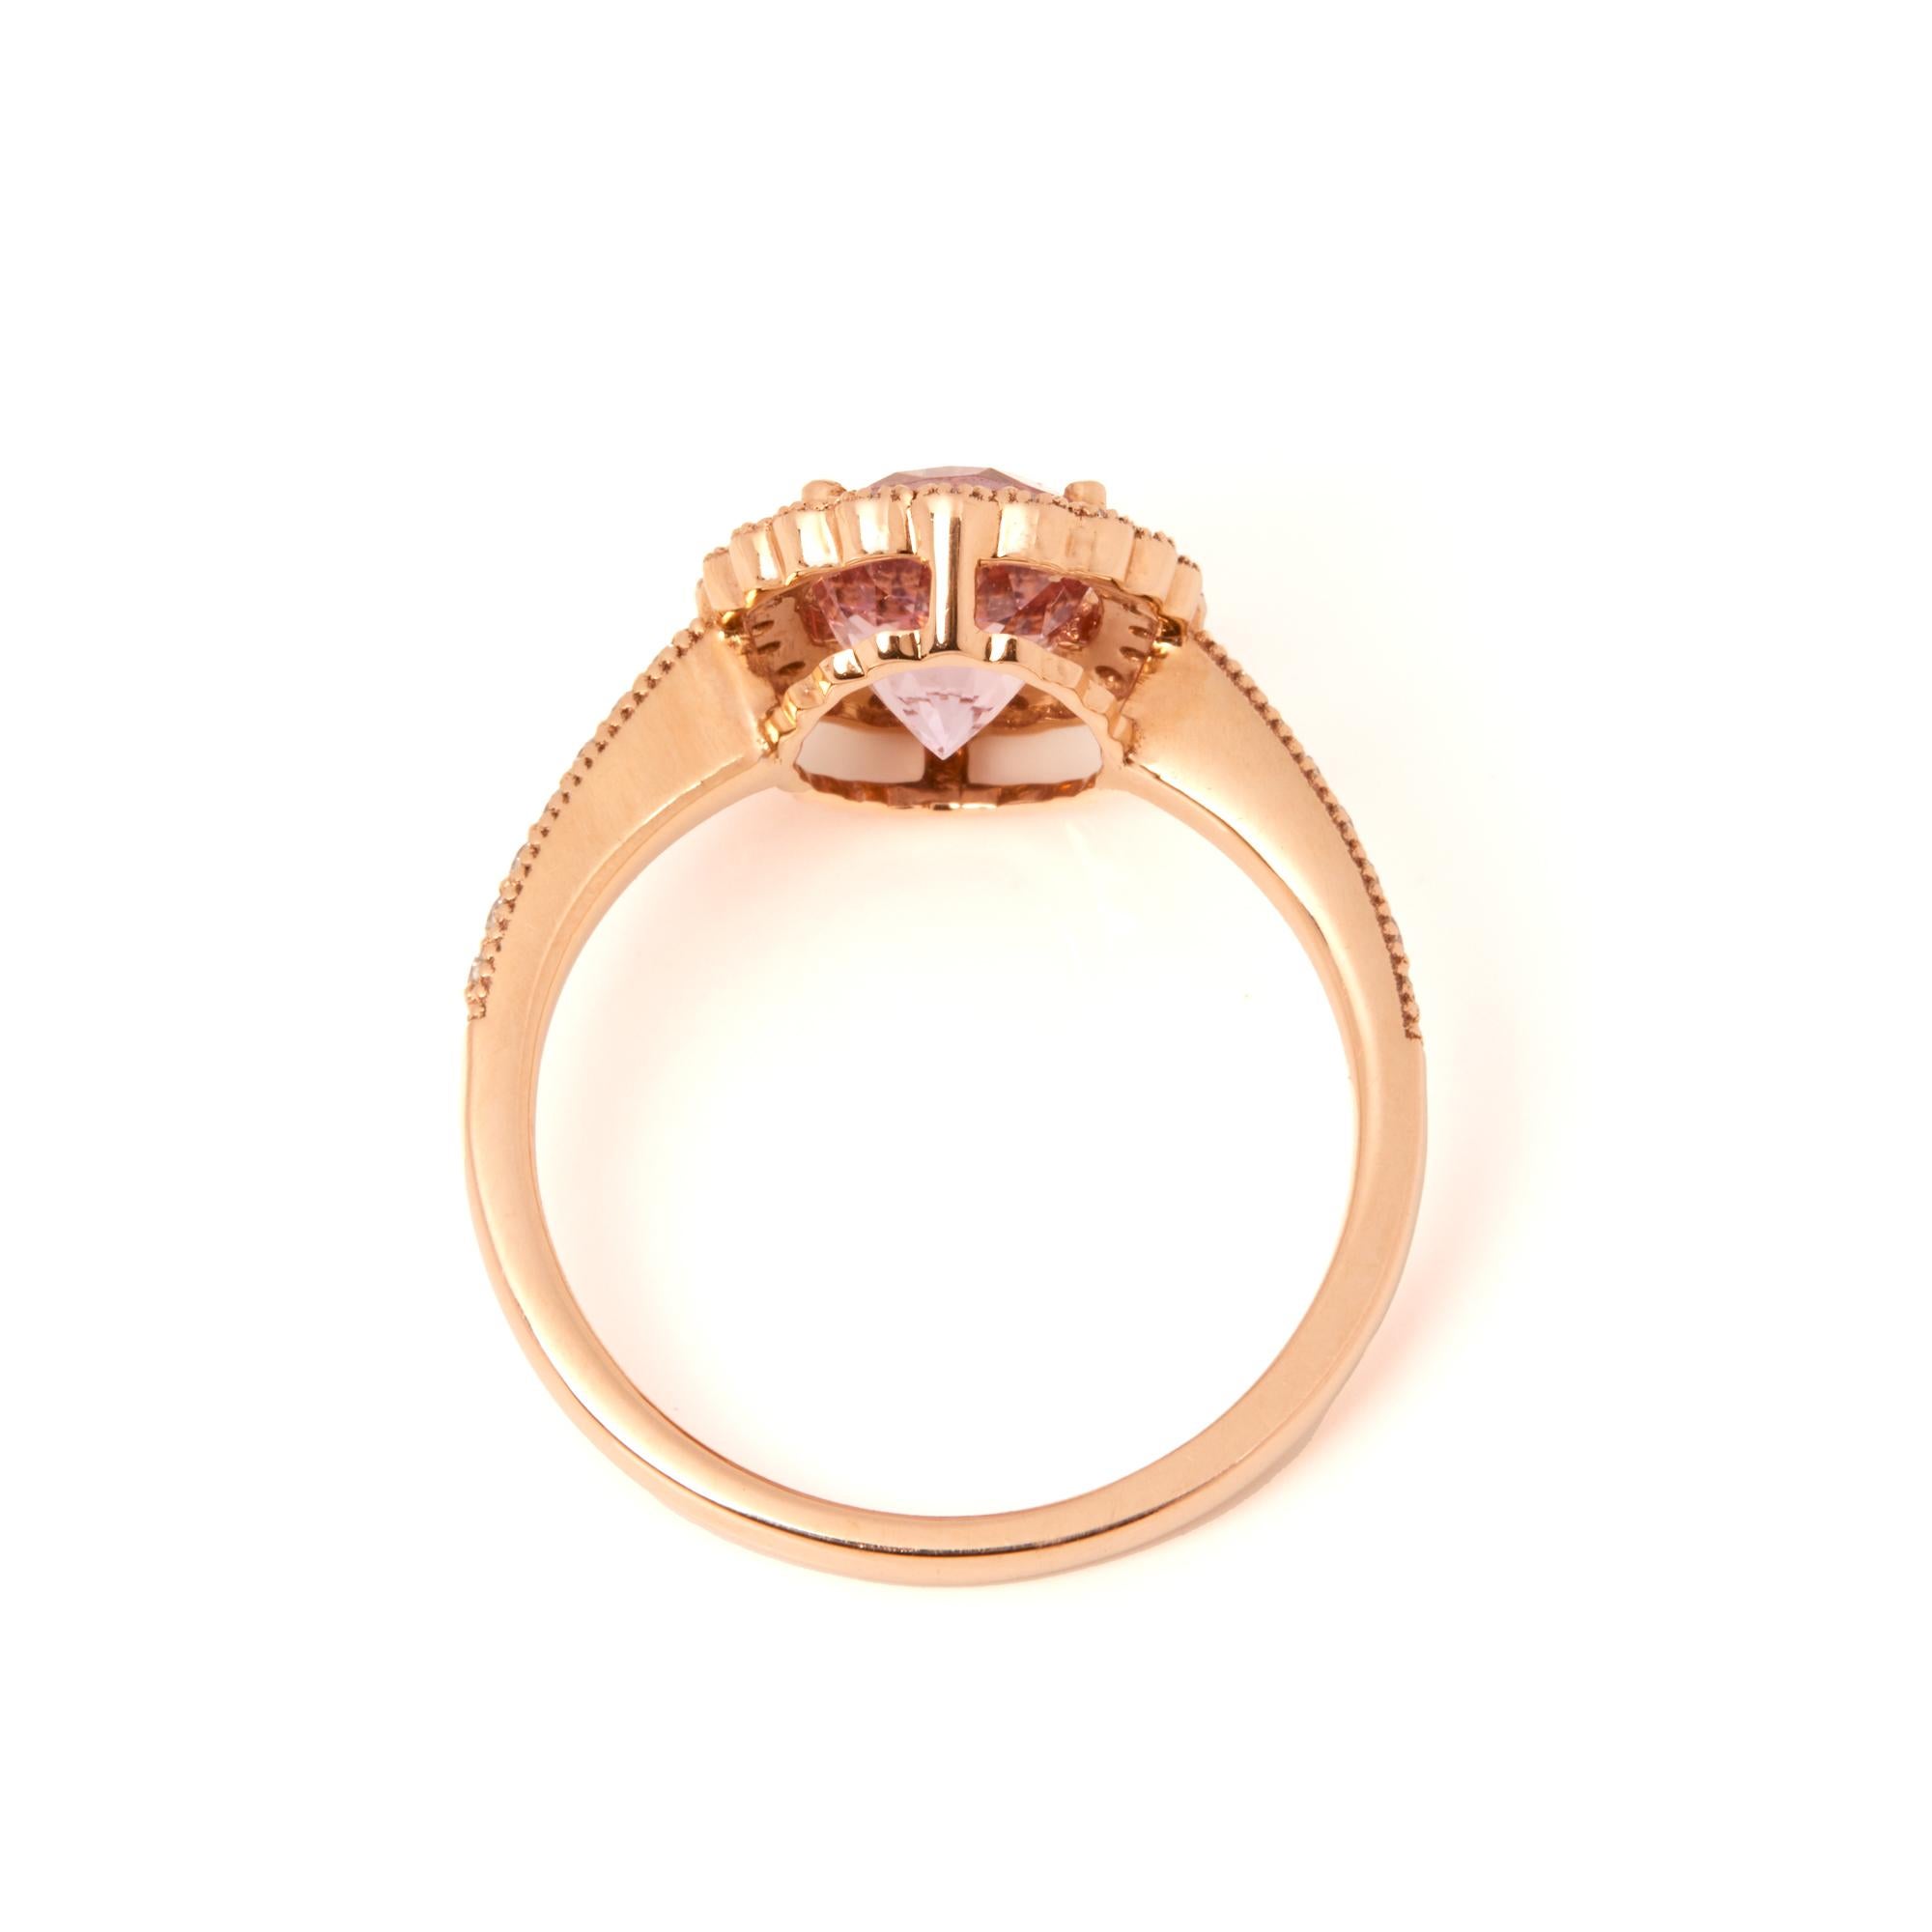 David Jerome Certified 1.76ct Oval Cut Morganite and Diamond Ring In New Condition For Sale In Bishop's Stortford, Hertfordshire